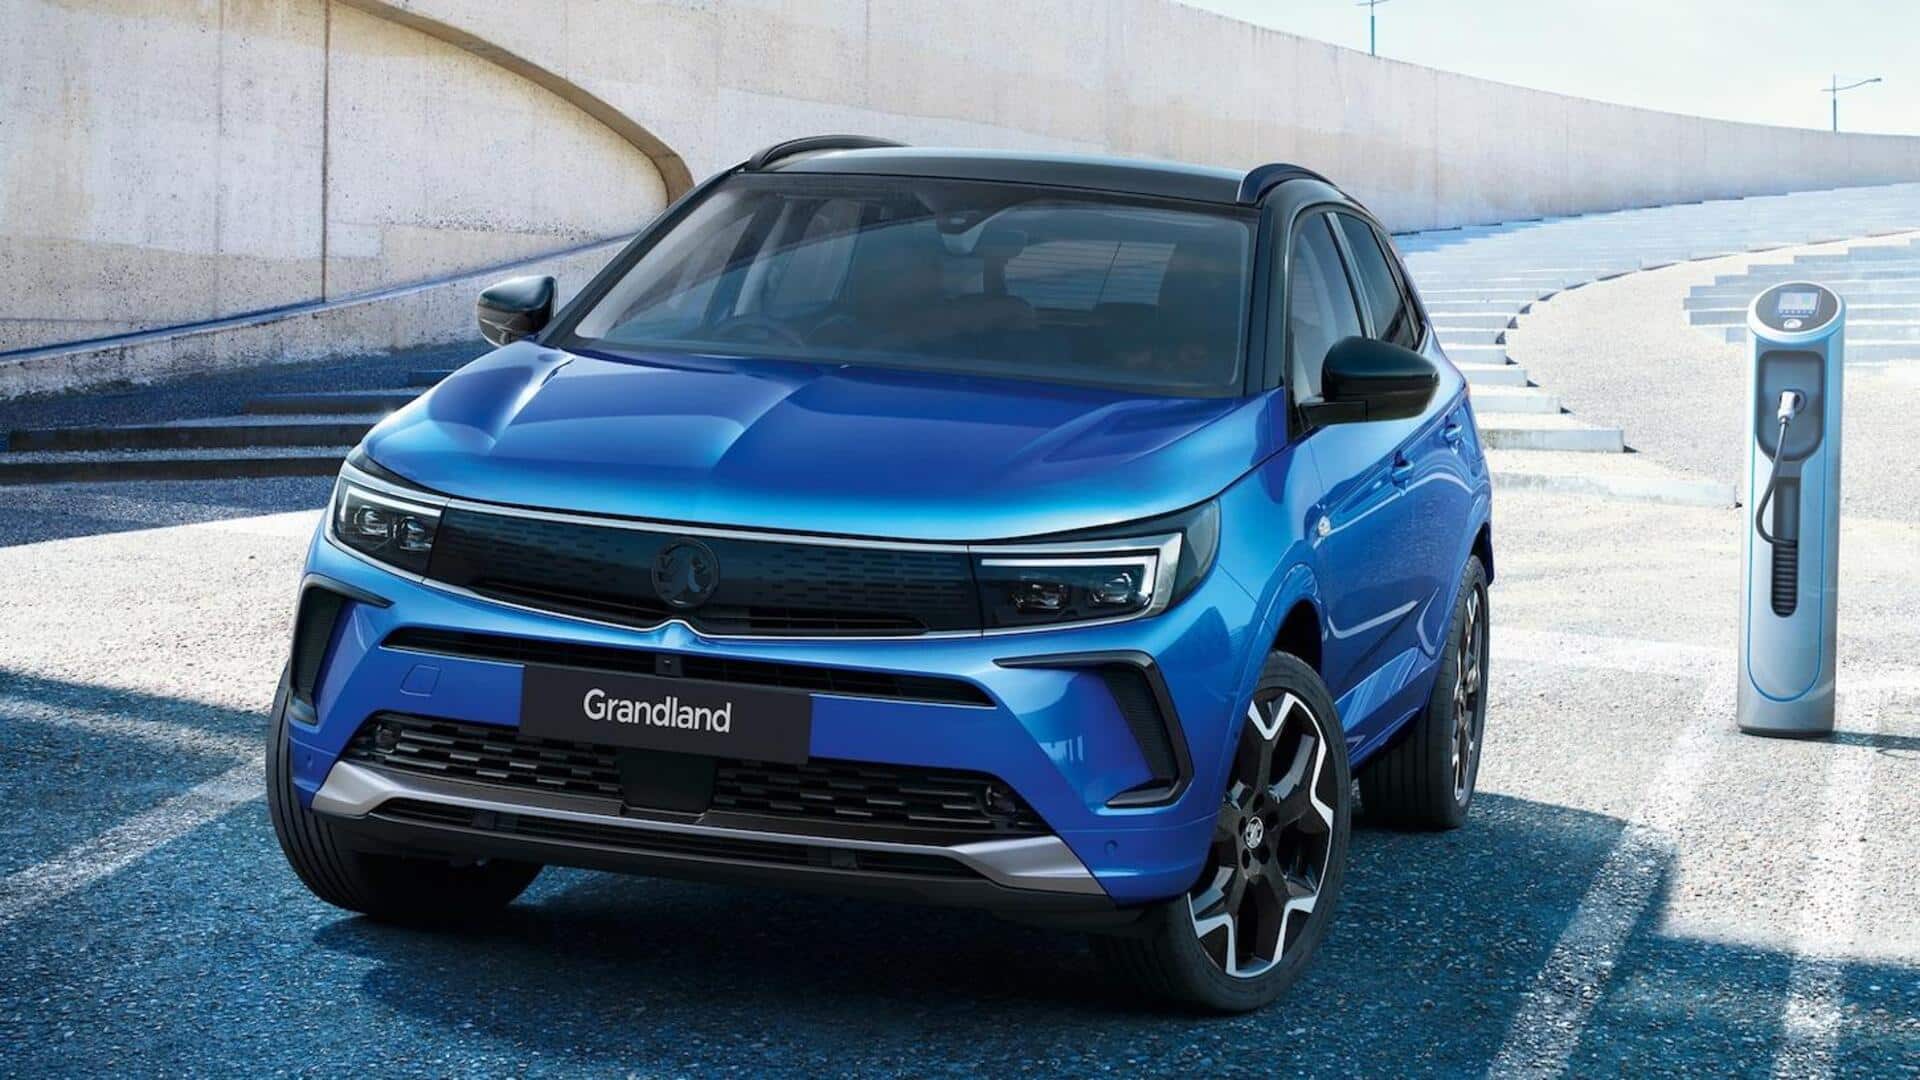 Electric Vauxhall Grandland SUV launching in 2024: What to expect